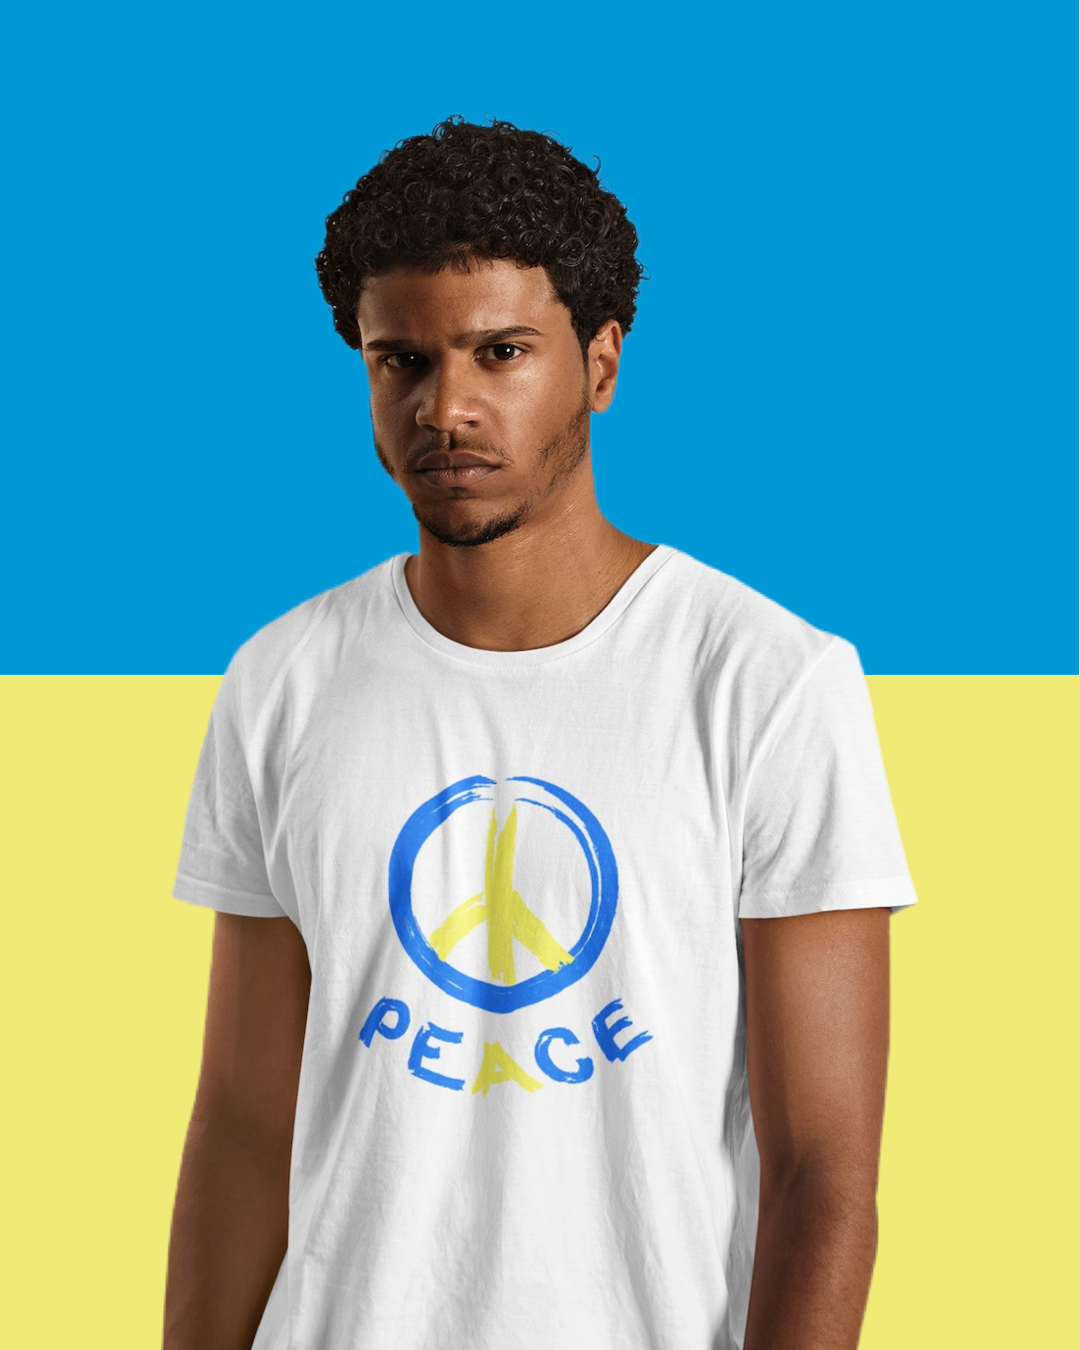 Peace - Fundraiser for the people of Ukraine